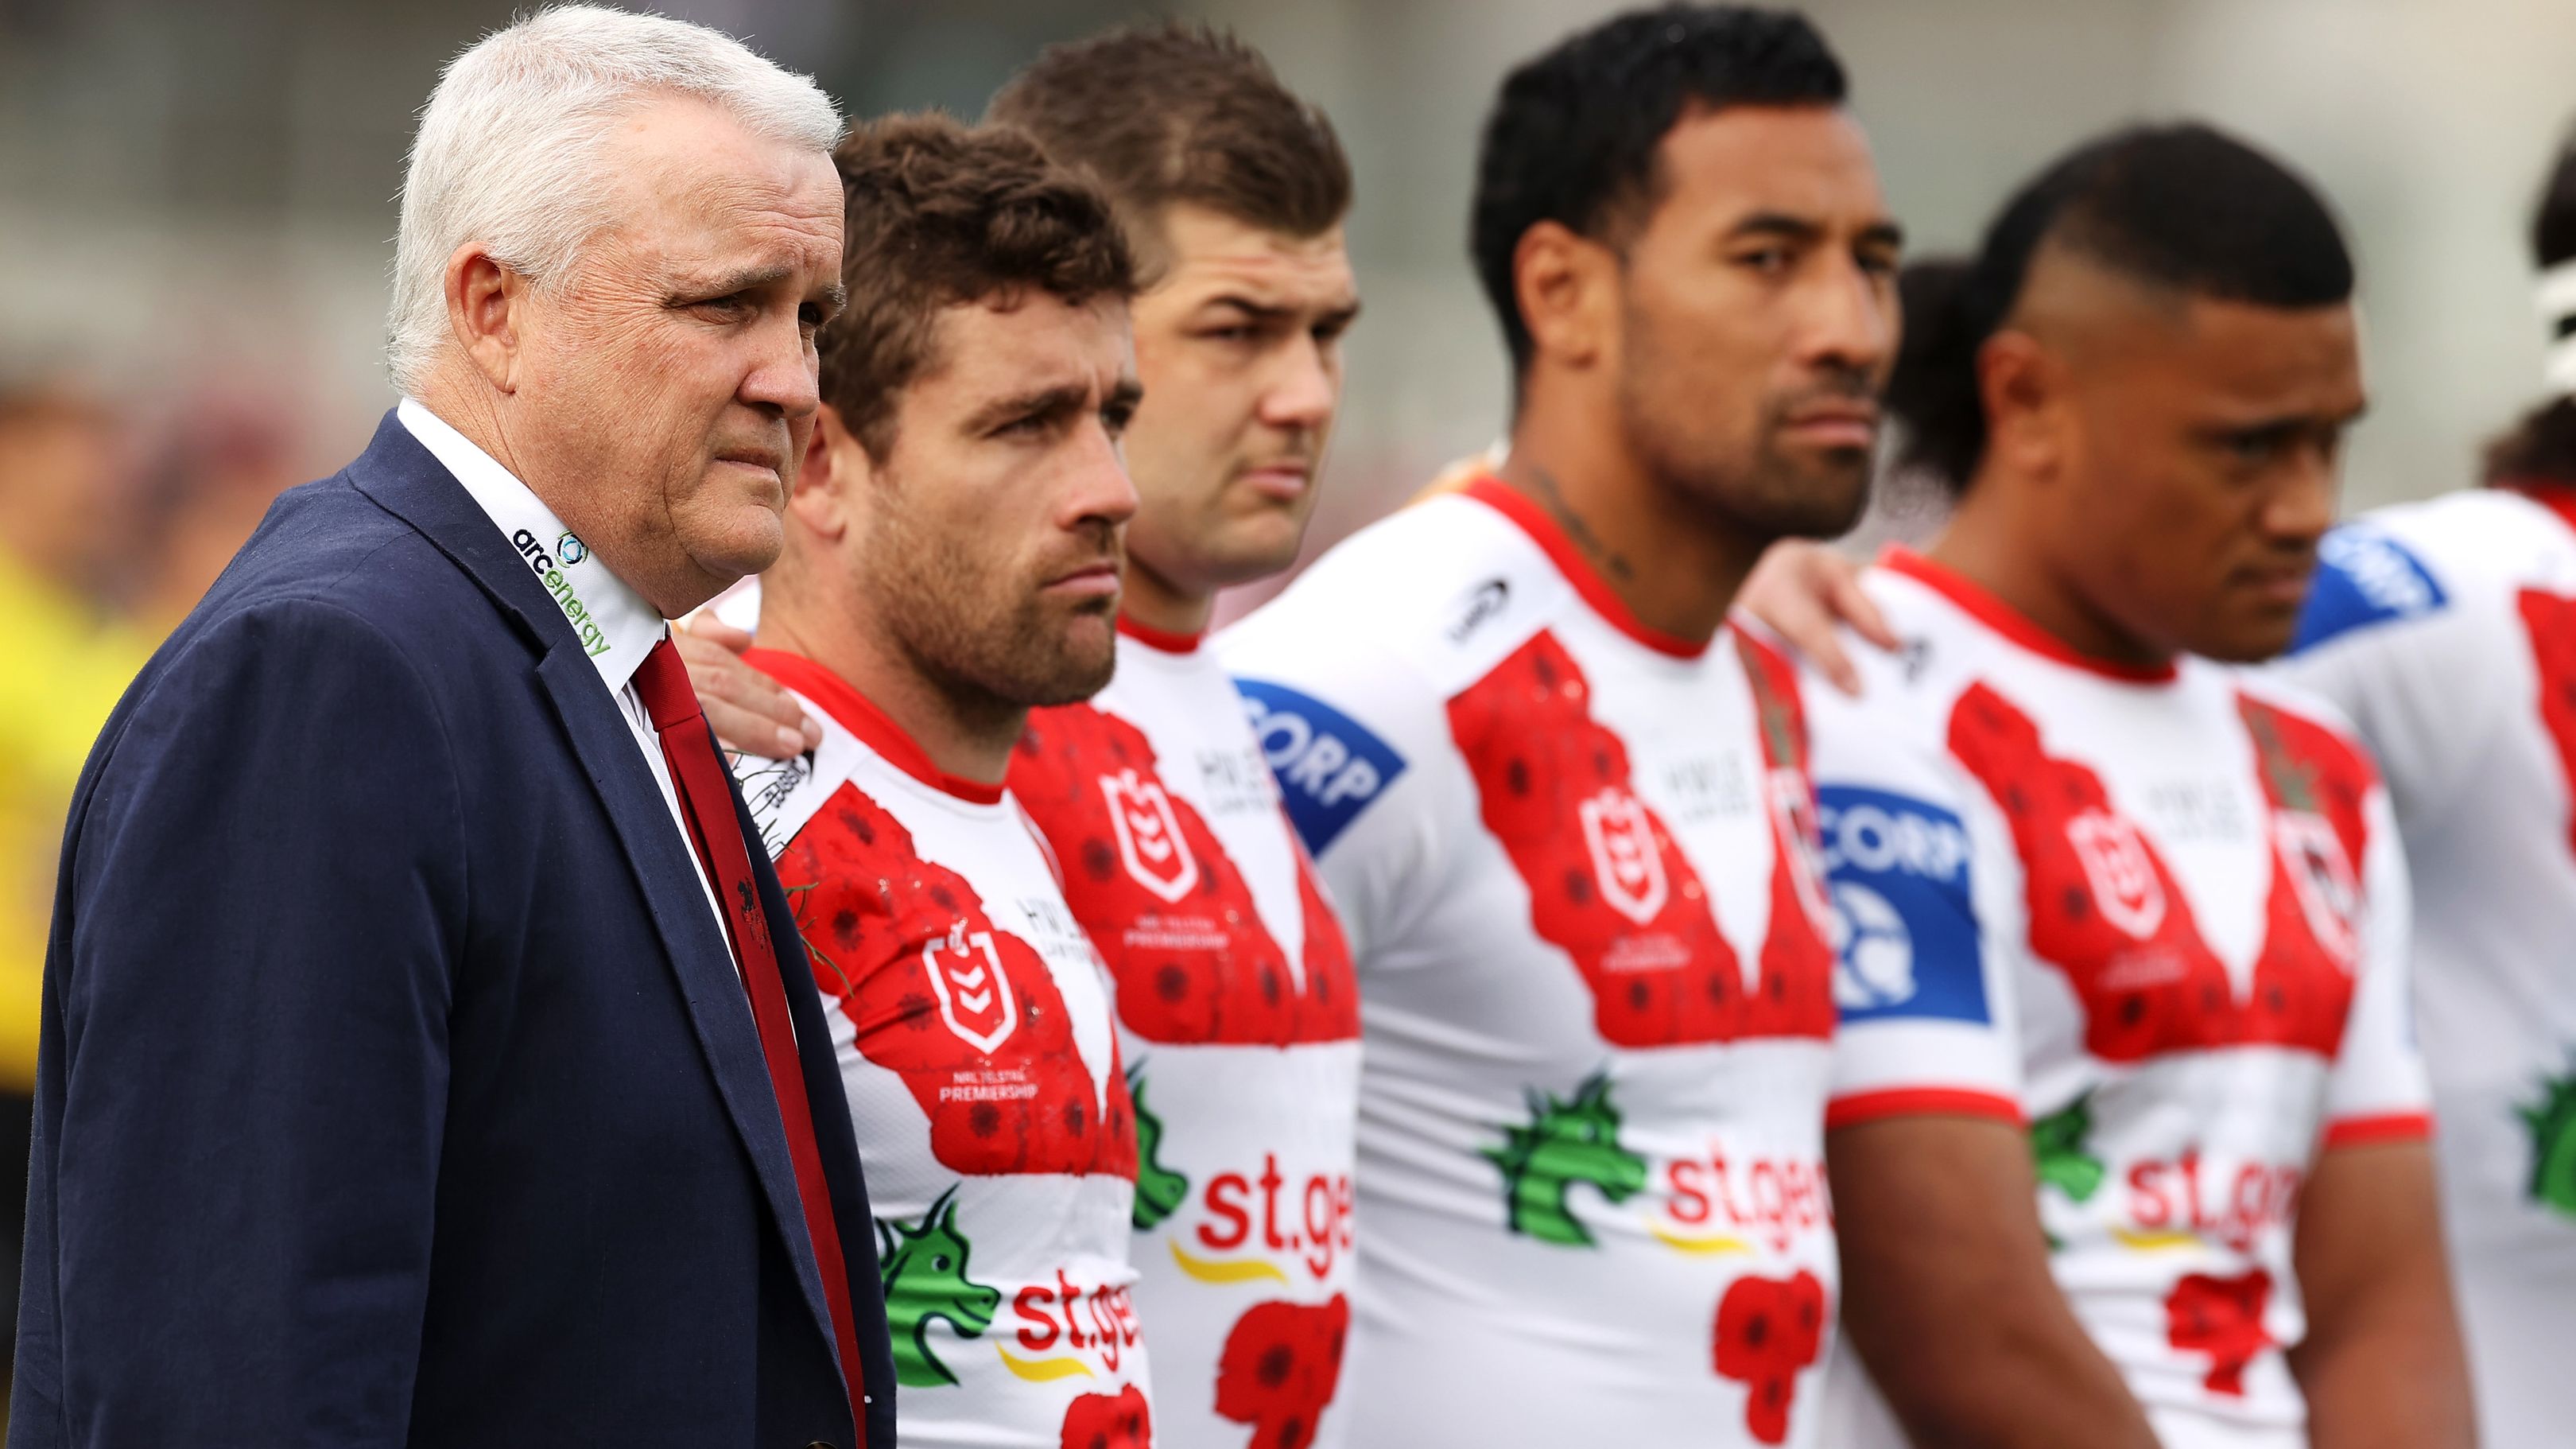 Dragons coach Anthony Griffin stands with the team for the anthems during the Anzac Day ceremony in 2022. (Photo by Mark Kolbe/Getty Images)